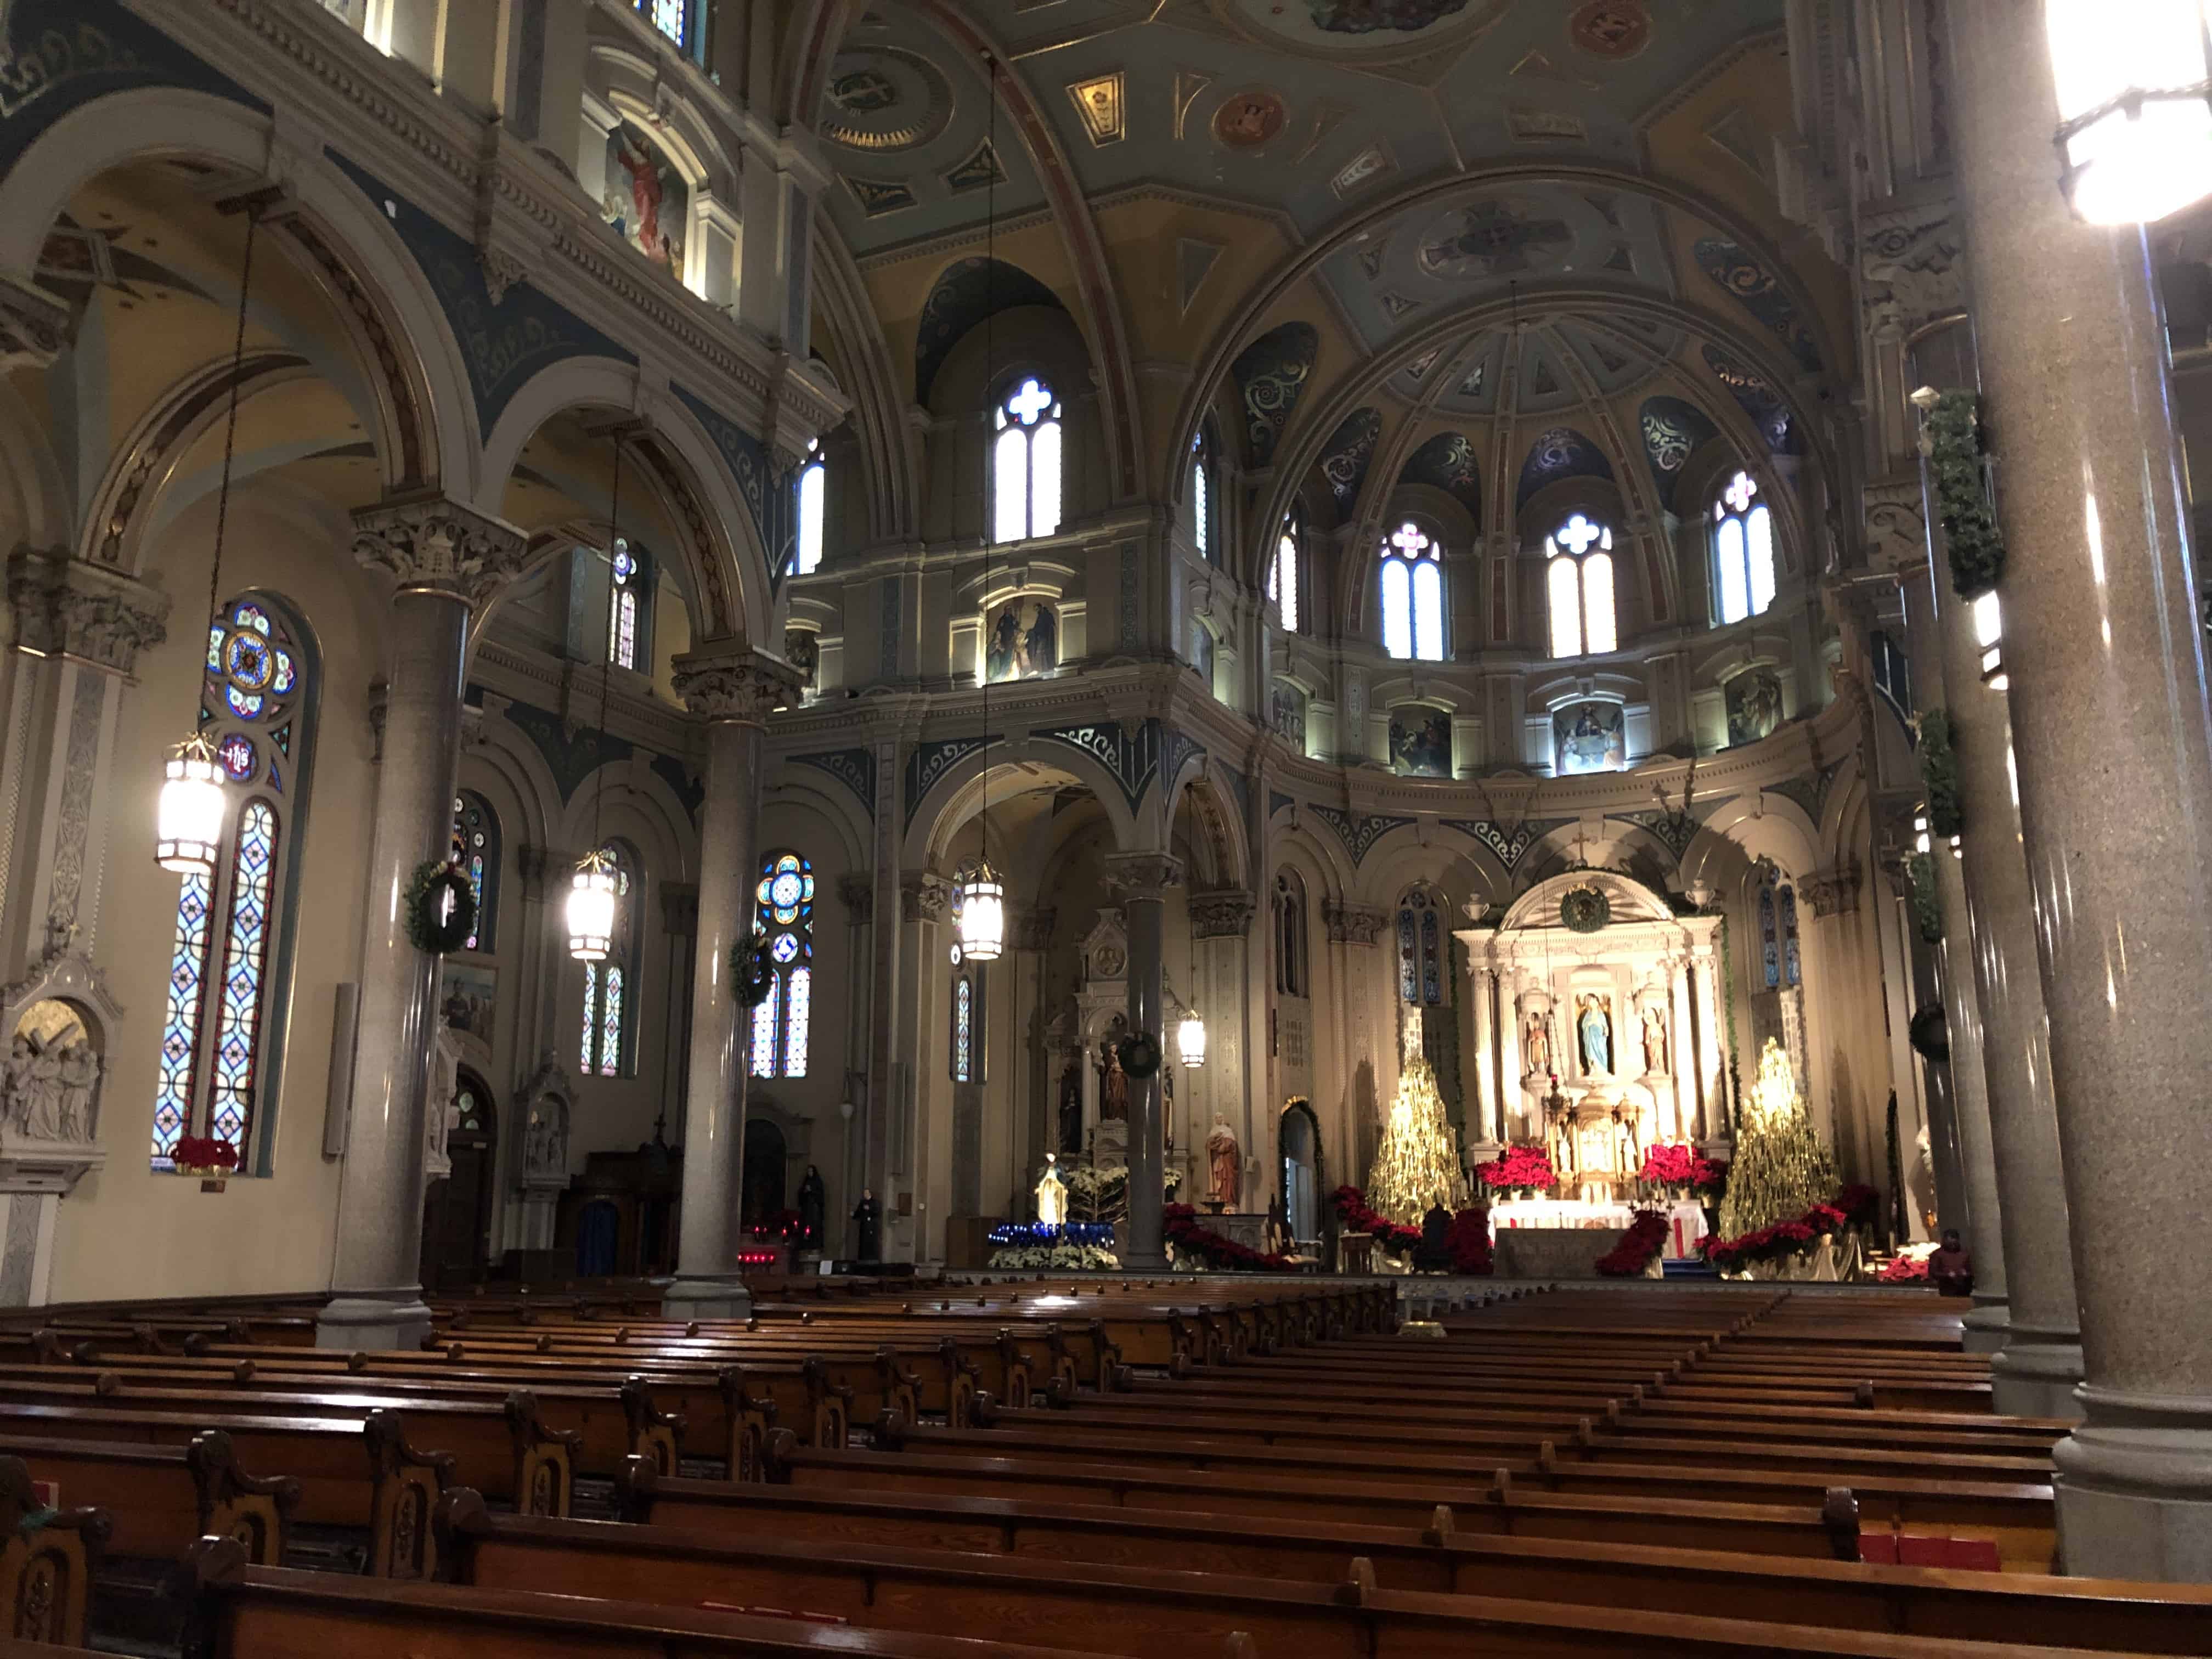 Old St. Mary's in Detroit, Michigan